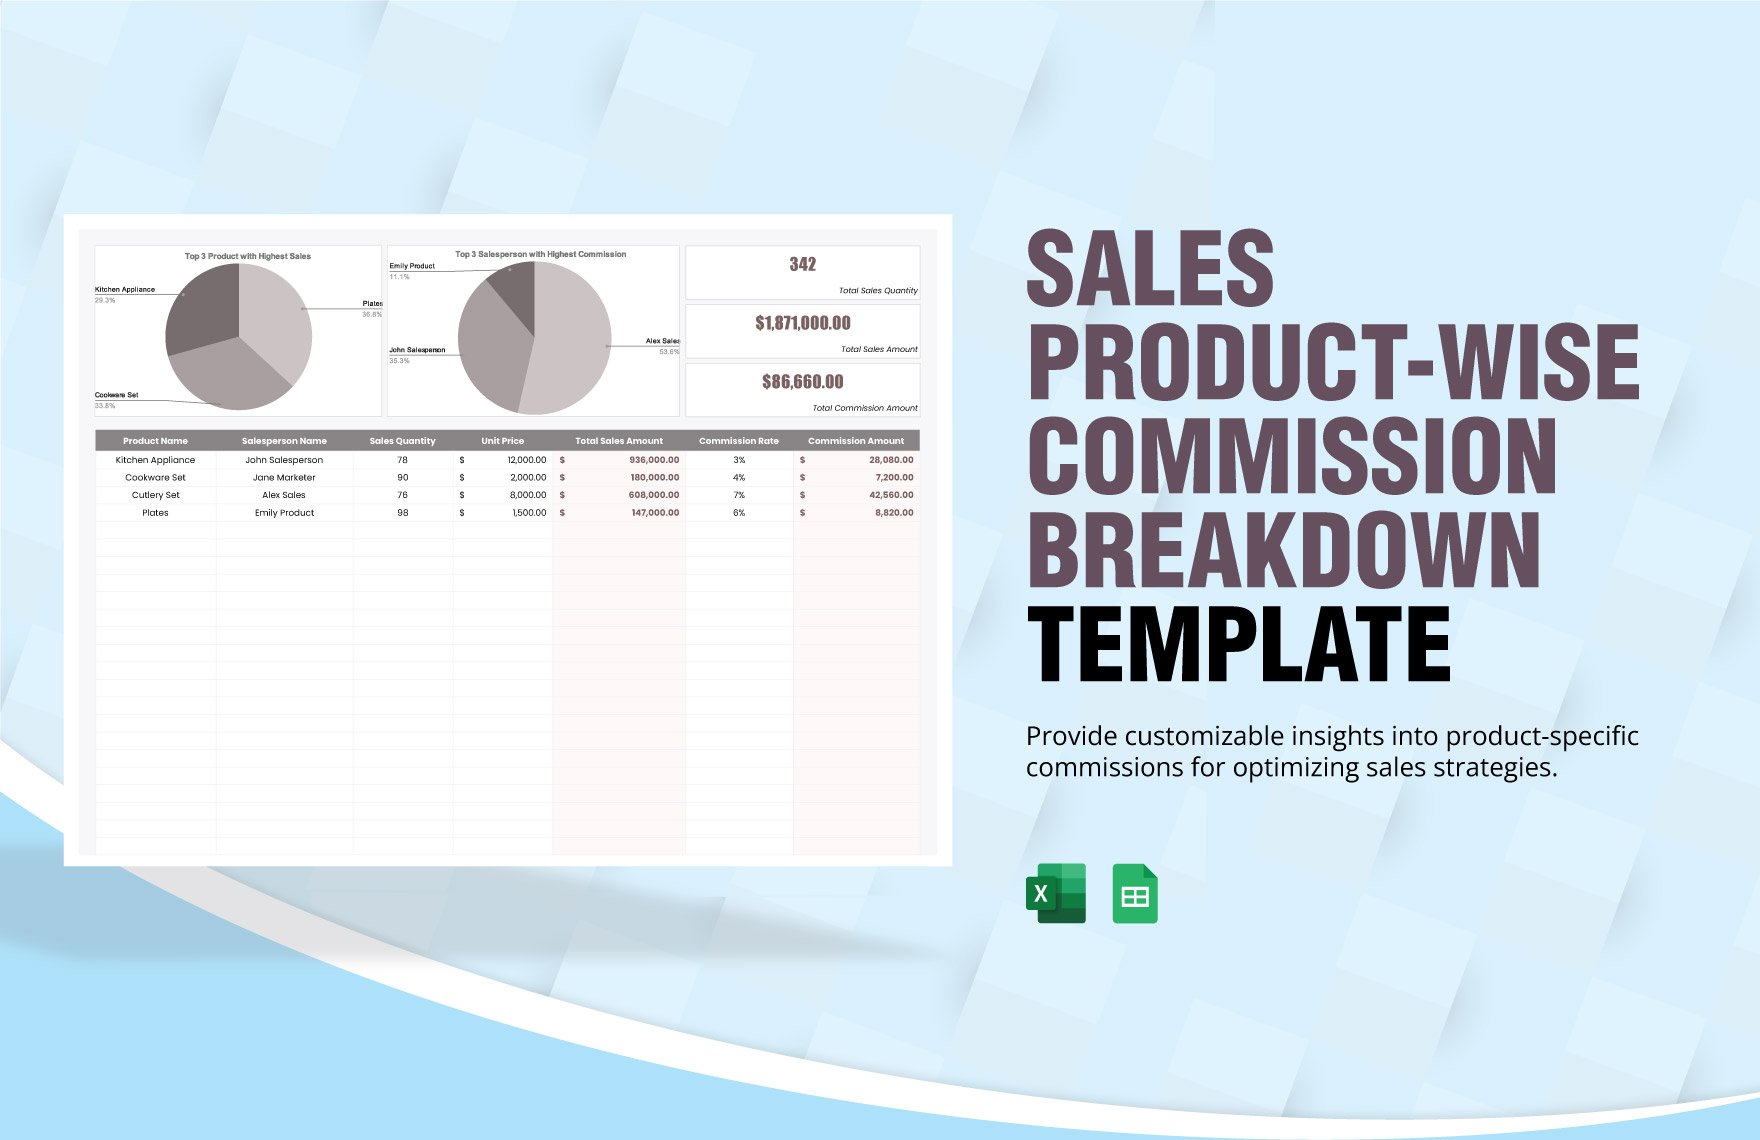 Sales Product-wise Commission Breakdown Template